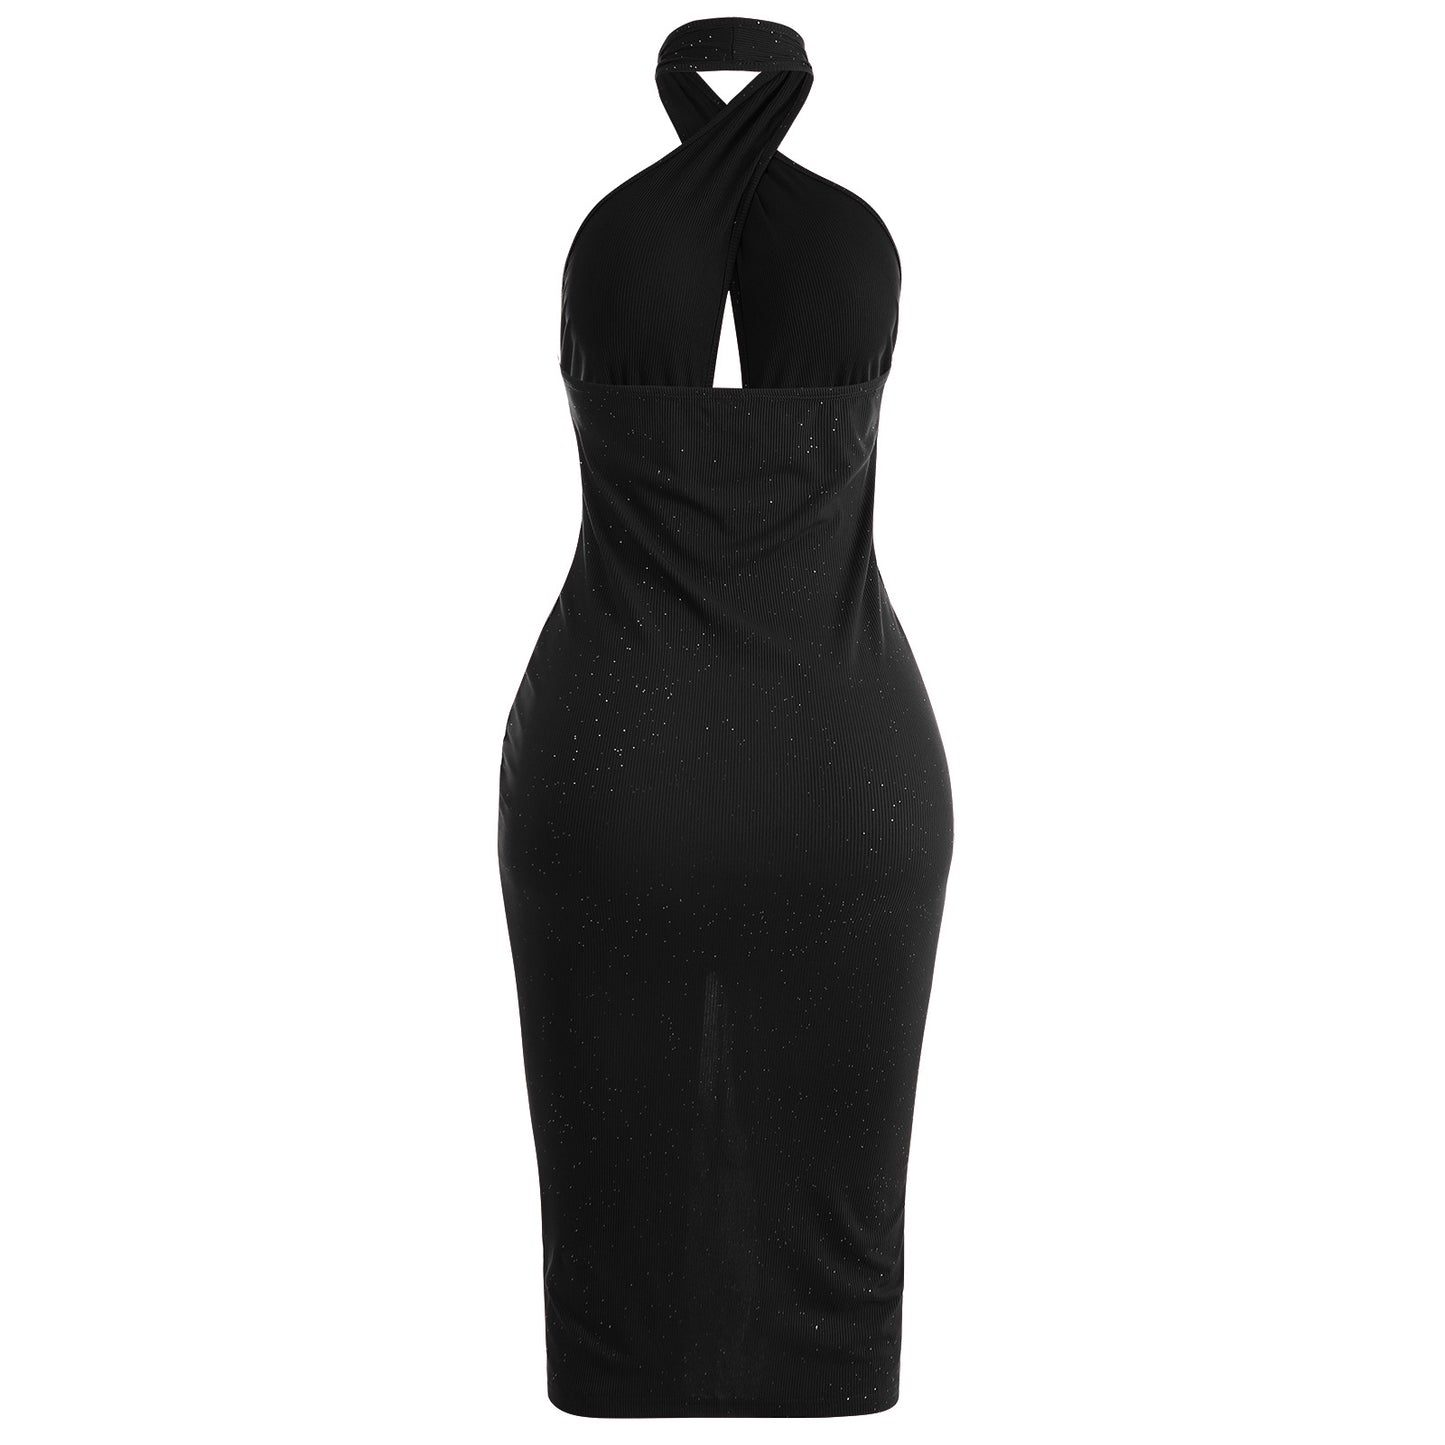 Sexy Backless Tight Bodycon Evening Party Dresses